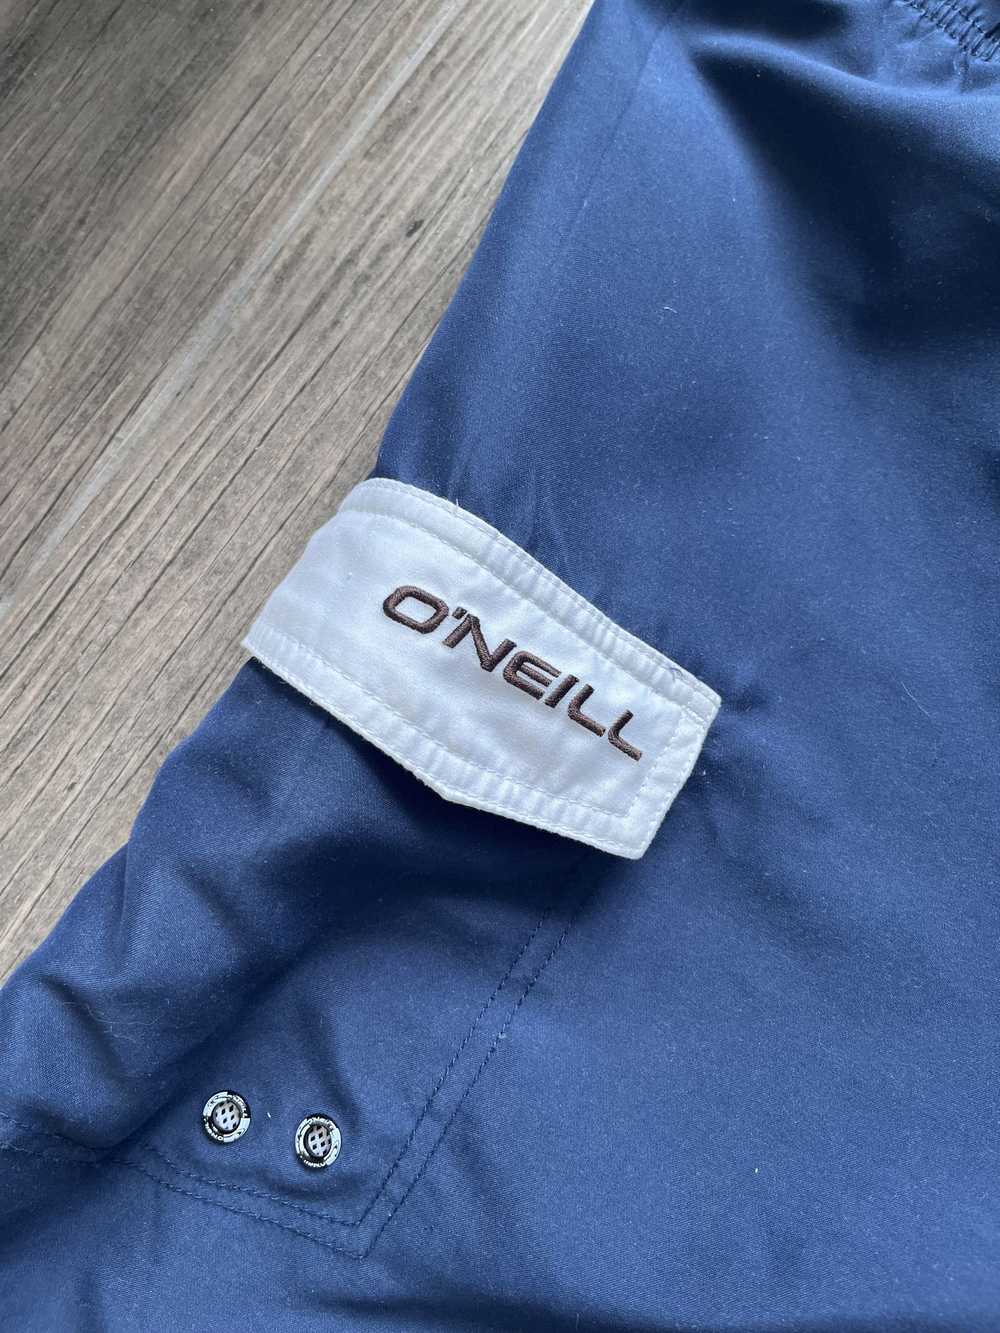 Oneill × Surf Style × Vintage O’Neill Vintage Sur… - image 3